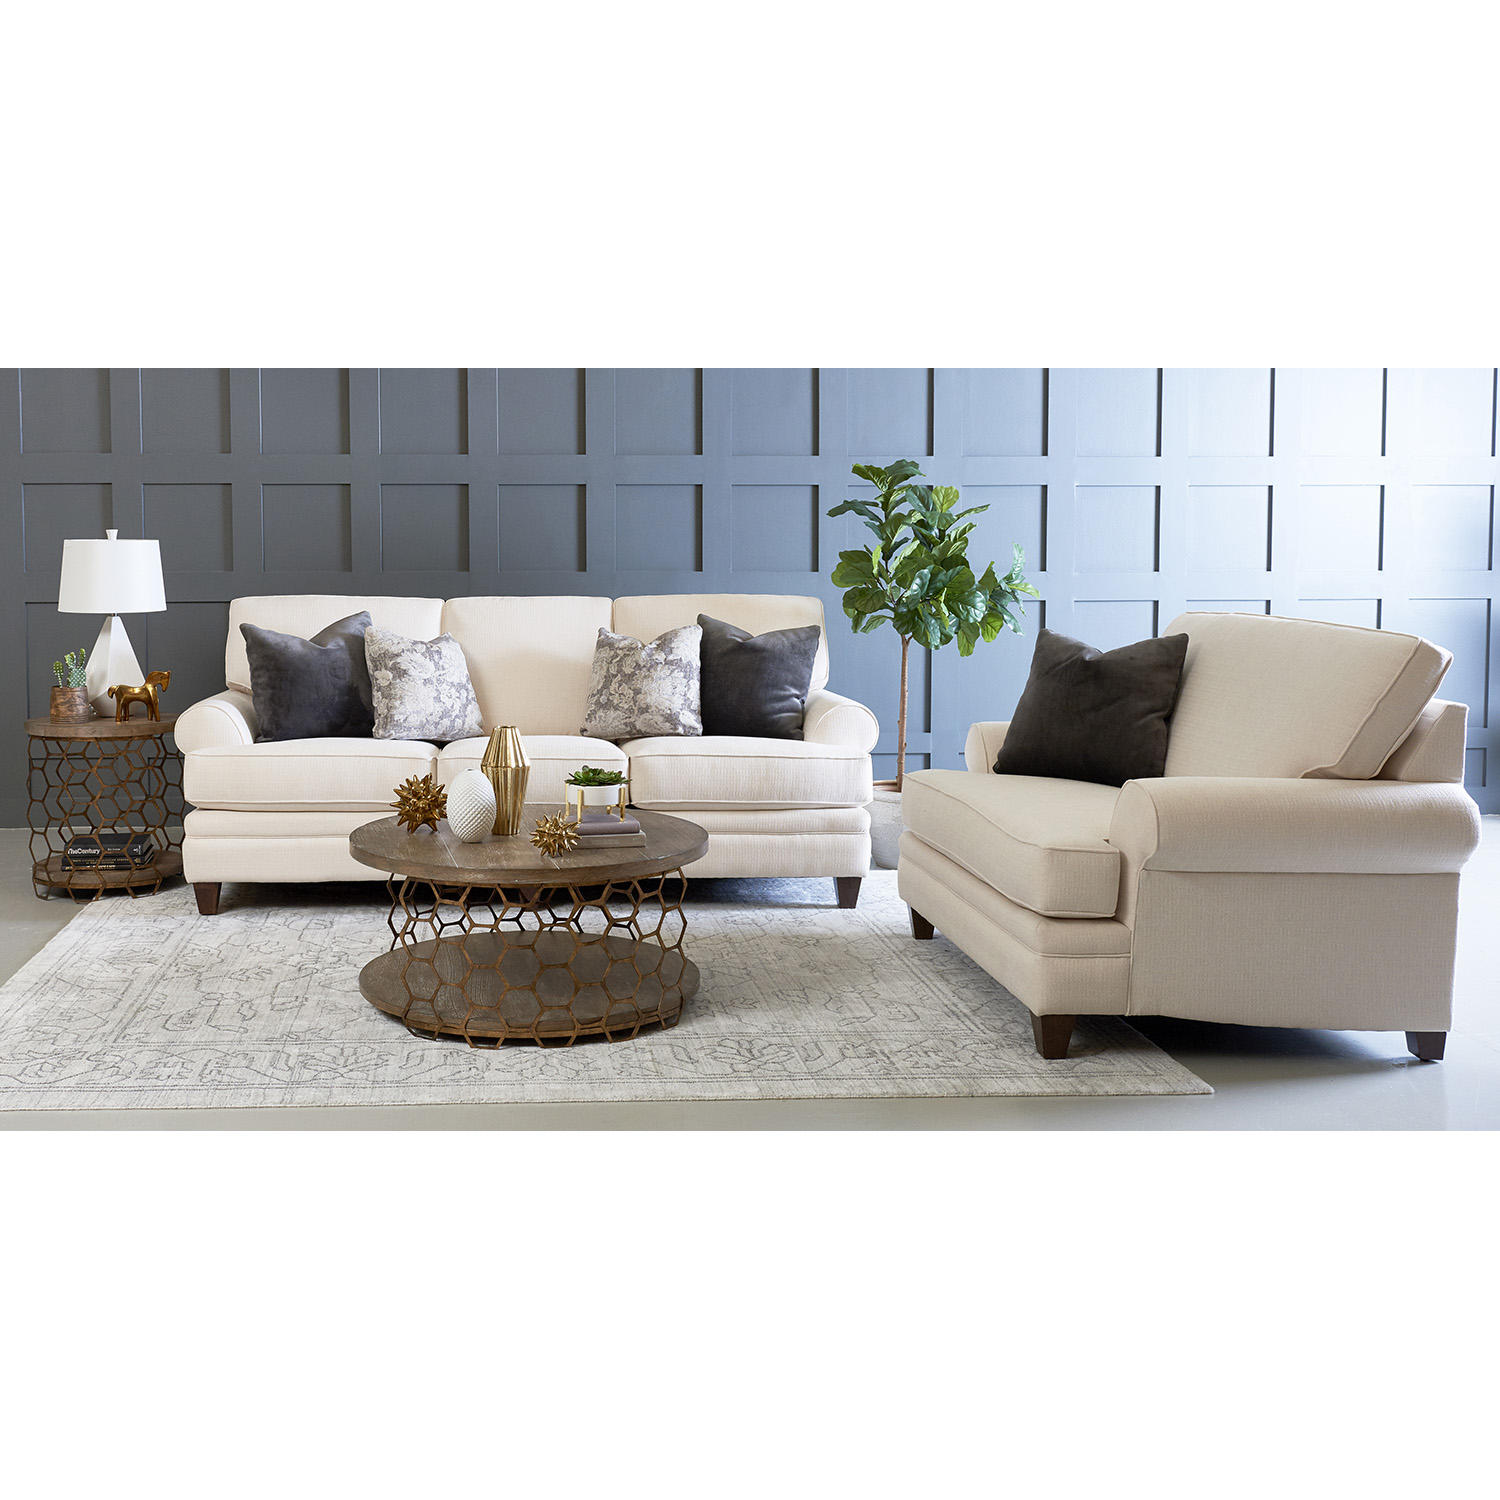 Klaussner Frankie 2 Piece Sofa and Accent Chair Living Room Set